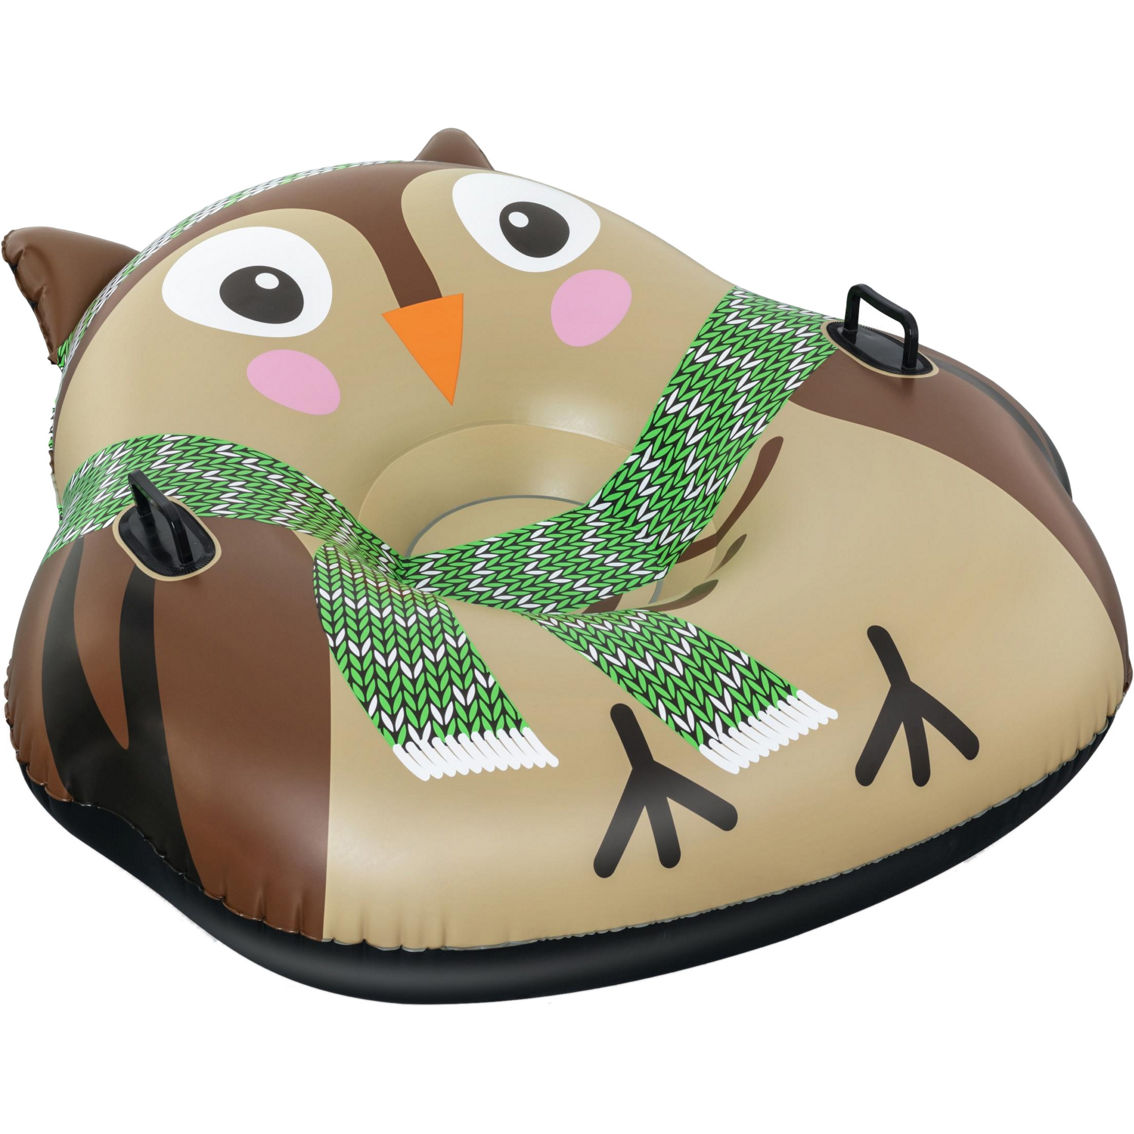 Bestway H2oGo Snow Oakley The Owl Snow Tube - Image 2 of 6